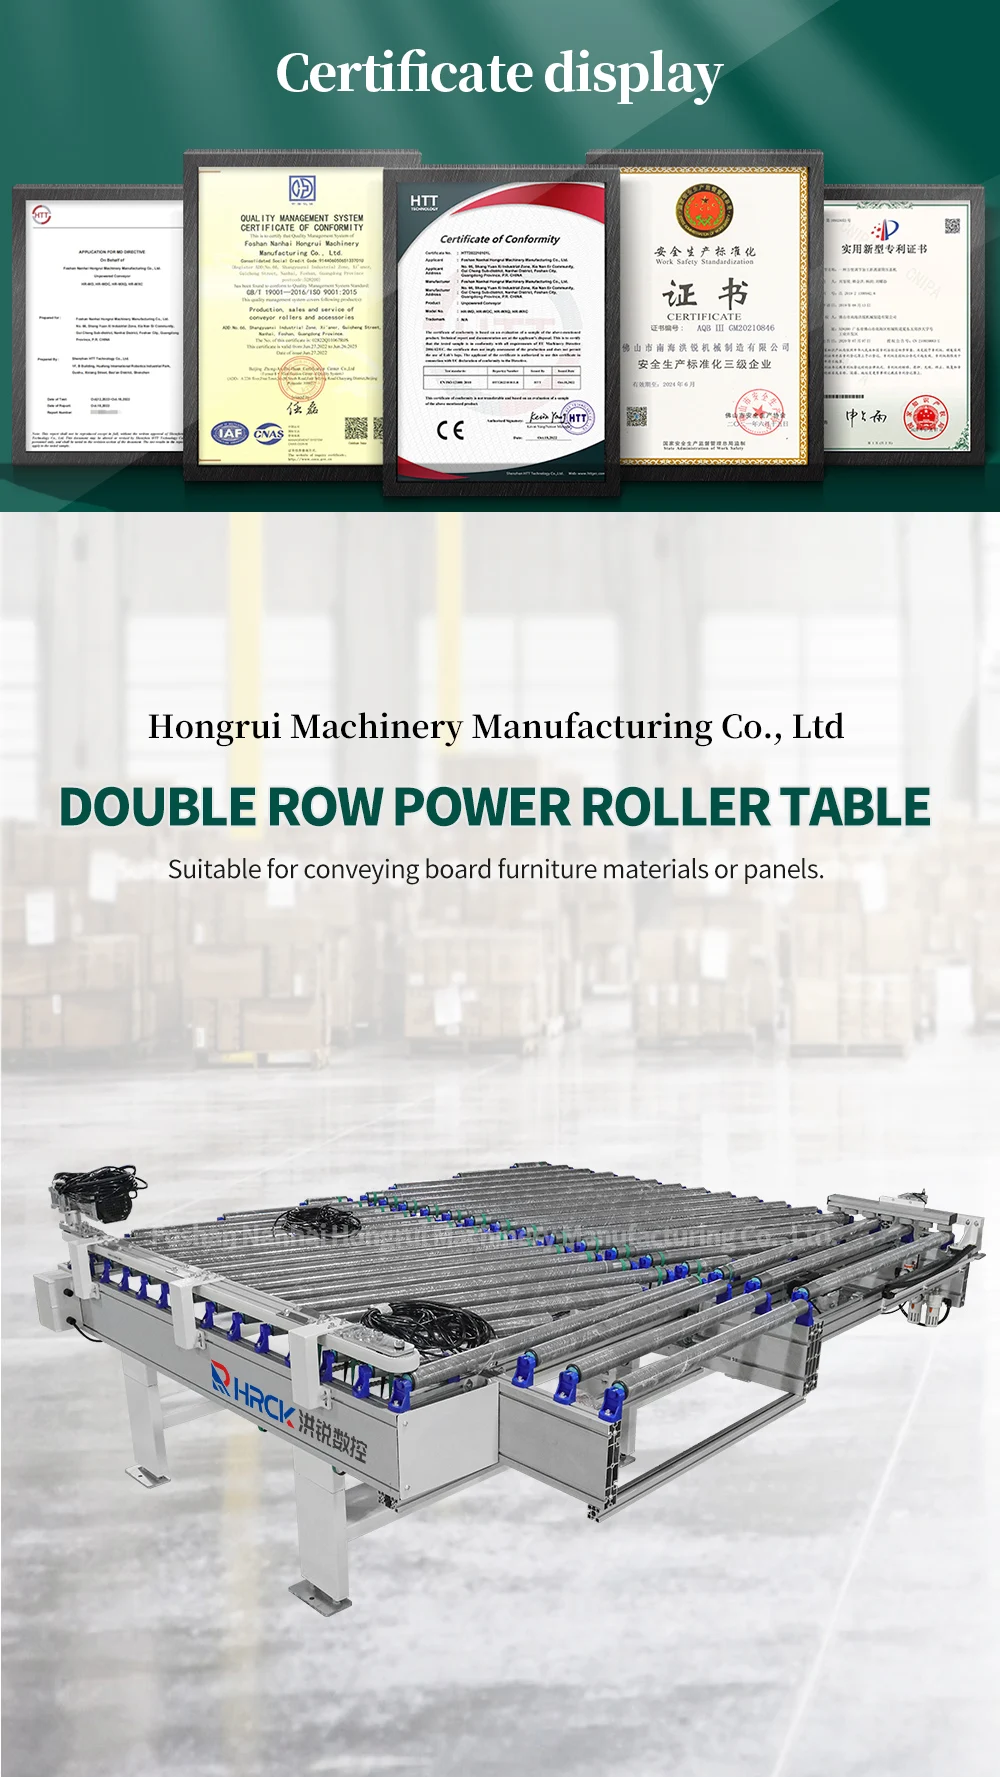 Hongrui High Efficiency Power Roller Table Line Is Used For The Connection Of 2 Same Direction Edgebanding Machine details